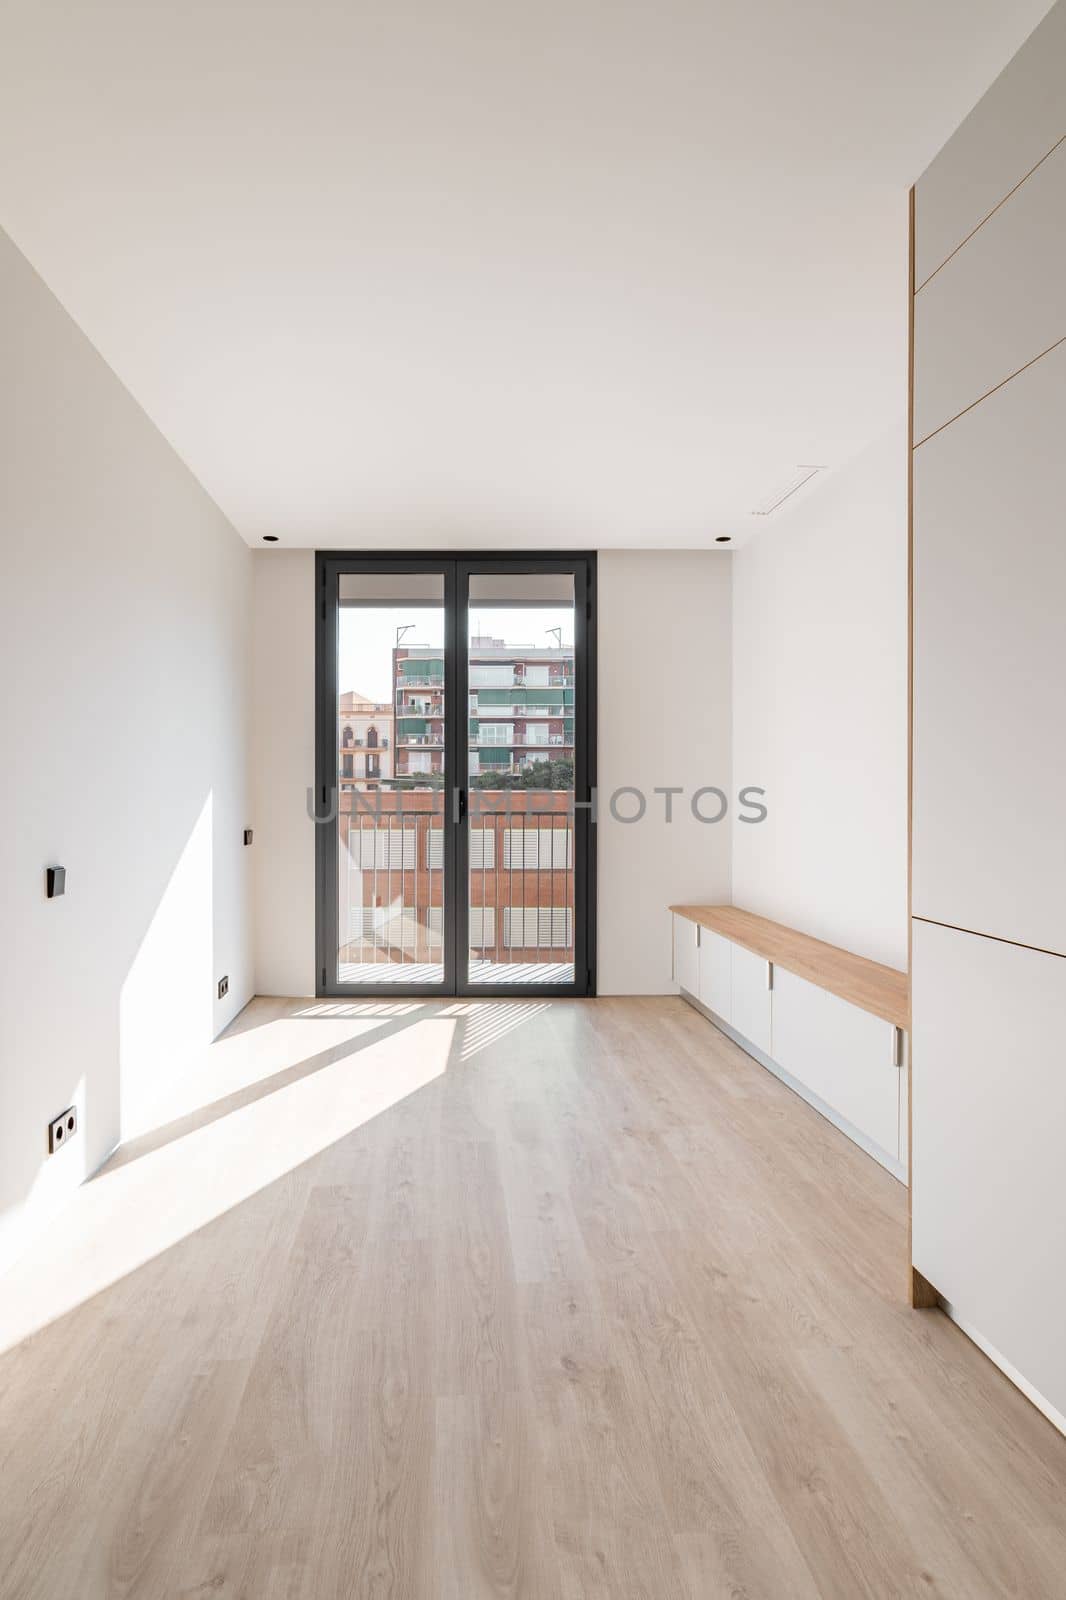 Direct view of black metal framed glass sliding doors at end of an empty bright clean room. Doors leading to spacious balcony overlooking neighboring house. Sunlight enters through glass door